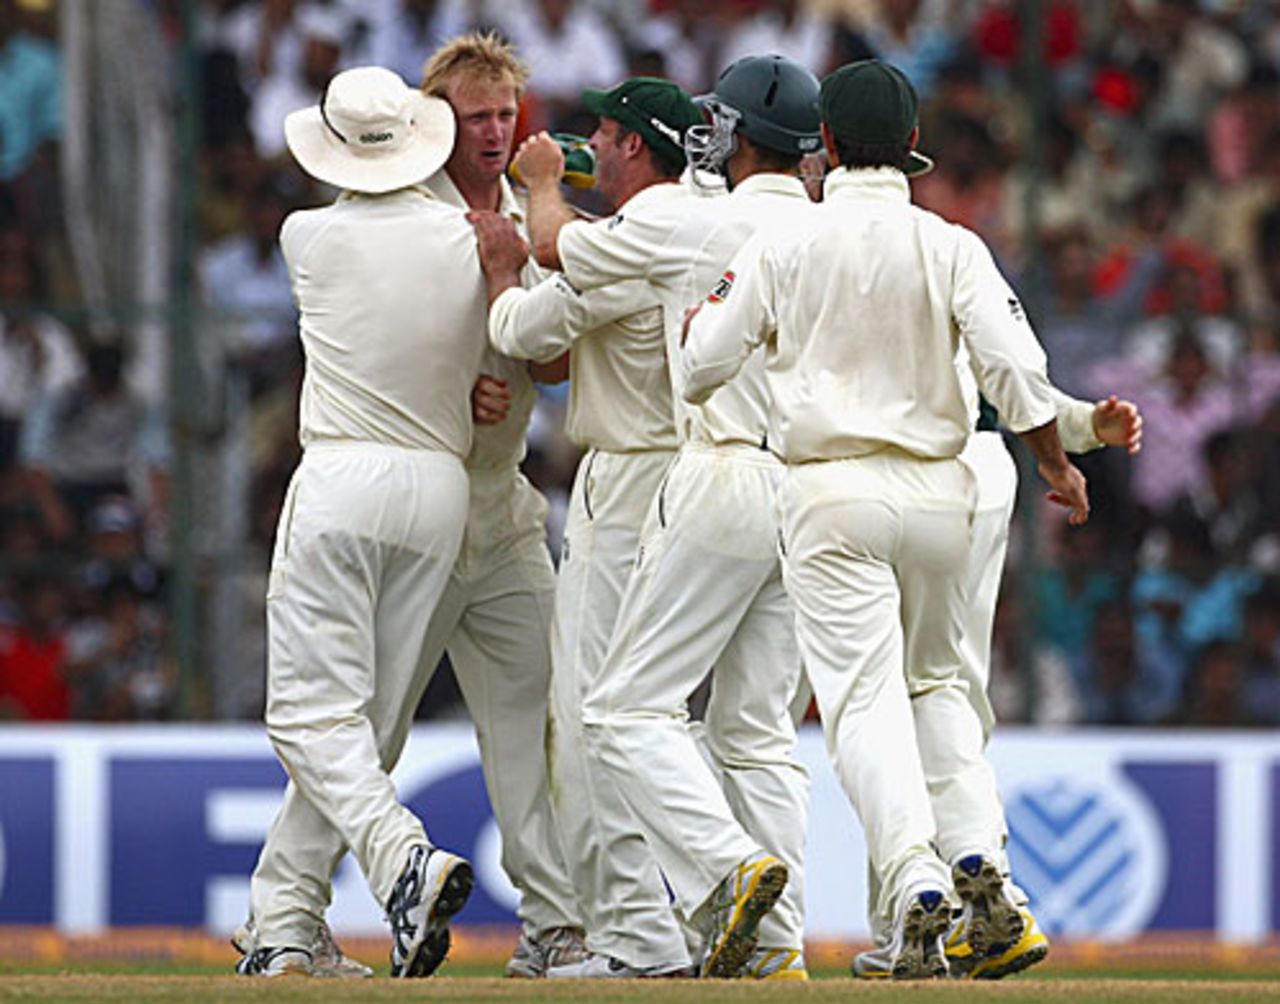 An emotional Cameron White is flanked by his team-mates after getting his debut wicket, India v Australia, 1st Test, Bangalore, 5th day, October 13, 2008